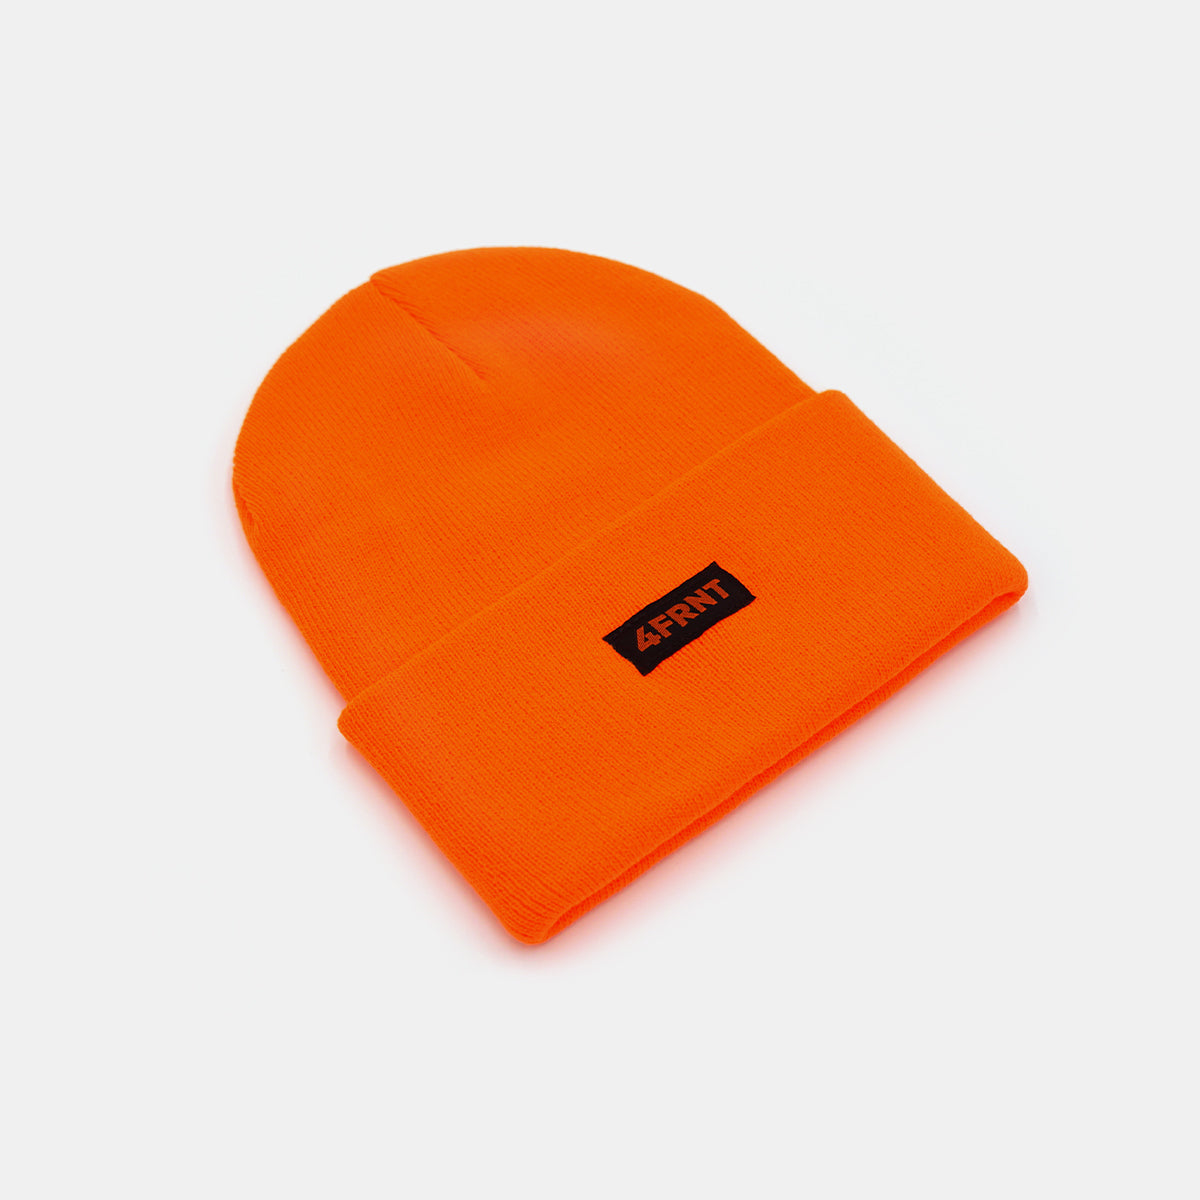 orange neon beanie with a black 4front logo side flat view